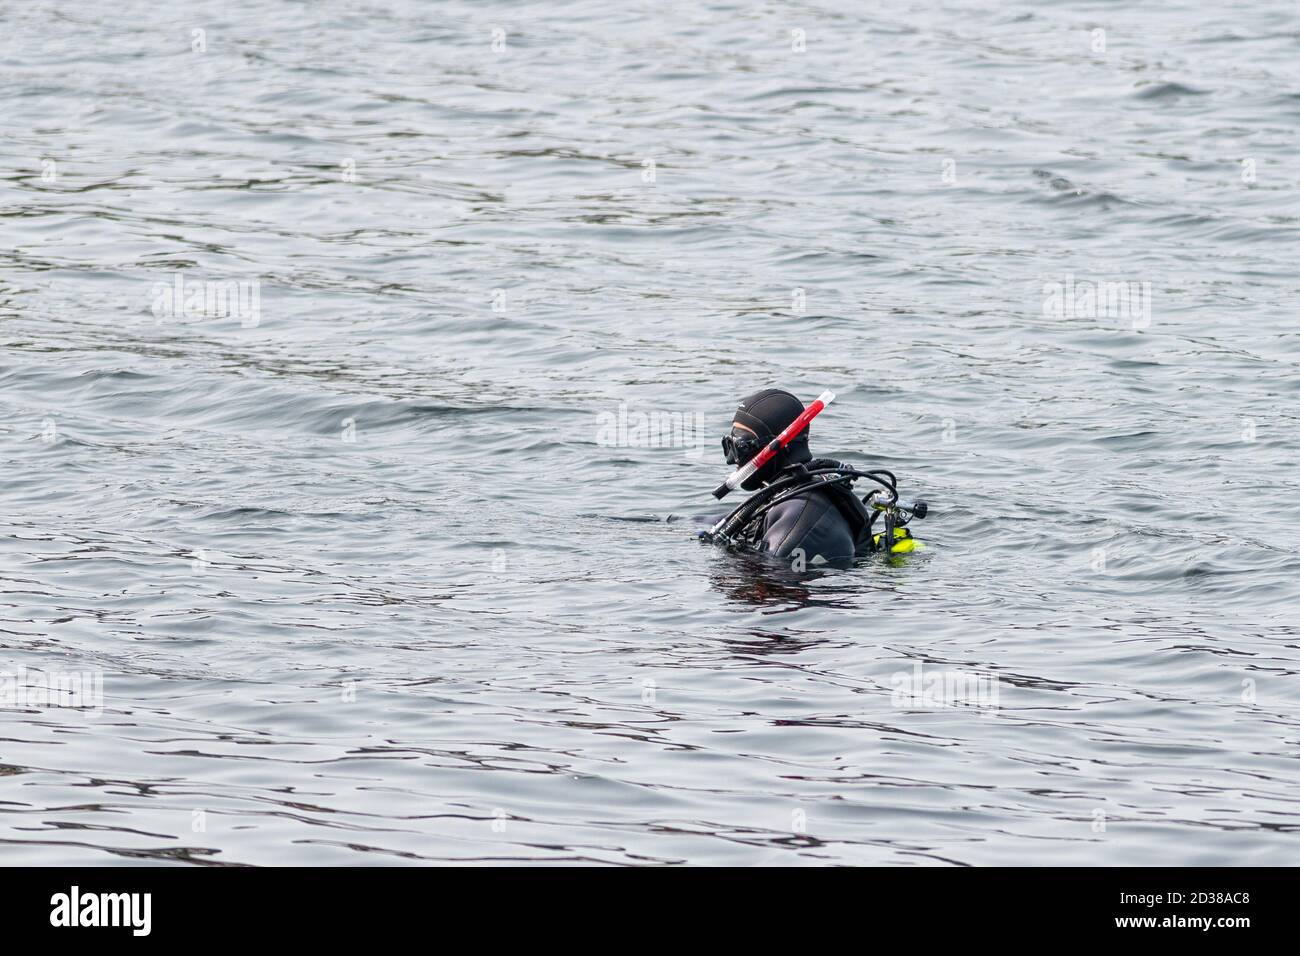 St. John's, Newfoundland / Canada - October 2020: A lone male swims in cold water wearing a black scuba diving suit. Stock Photo